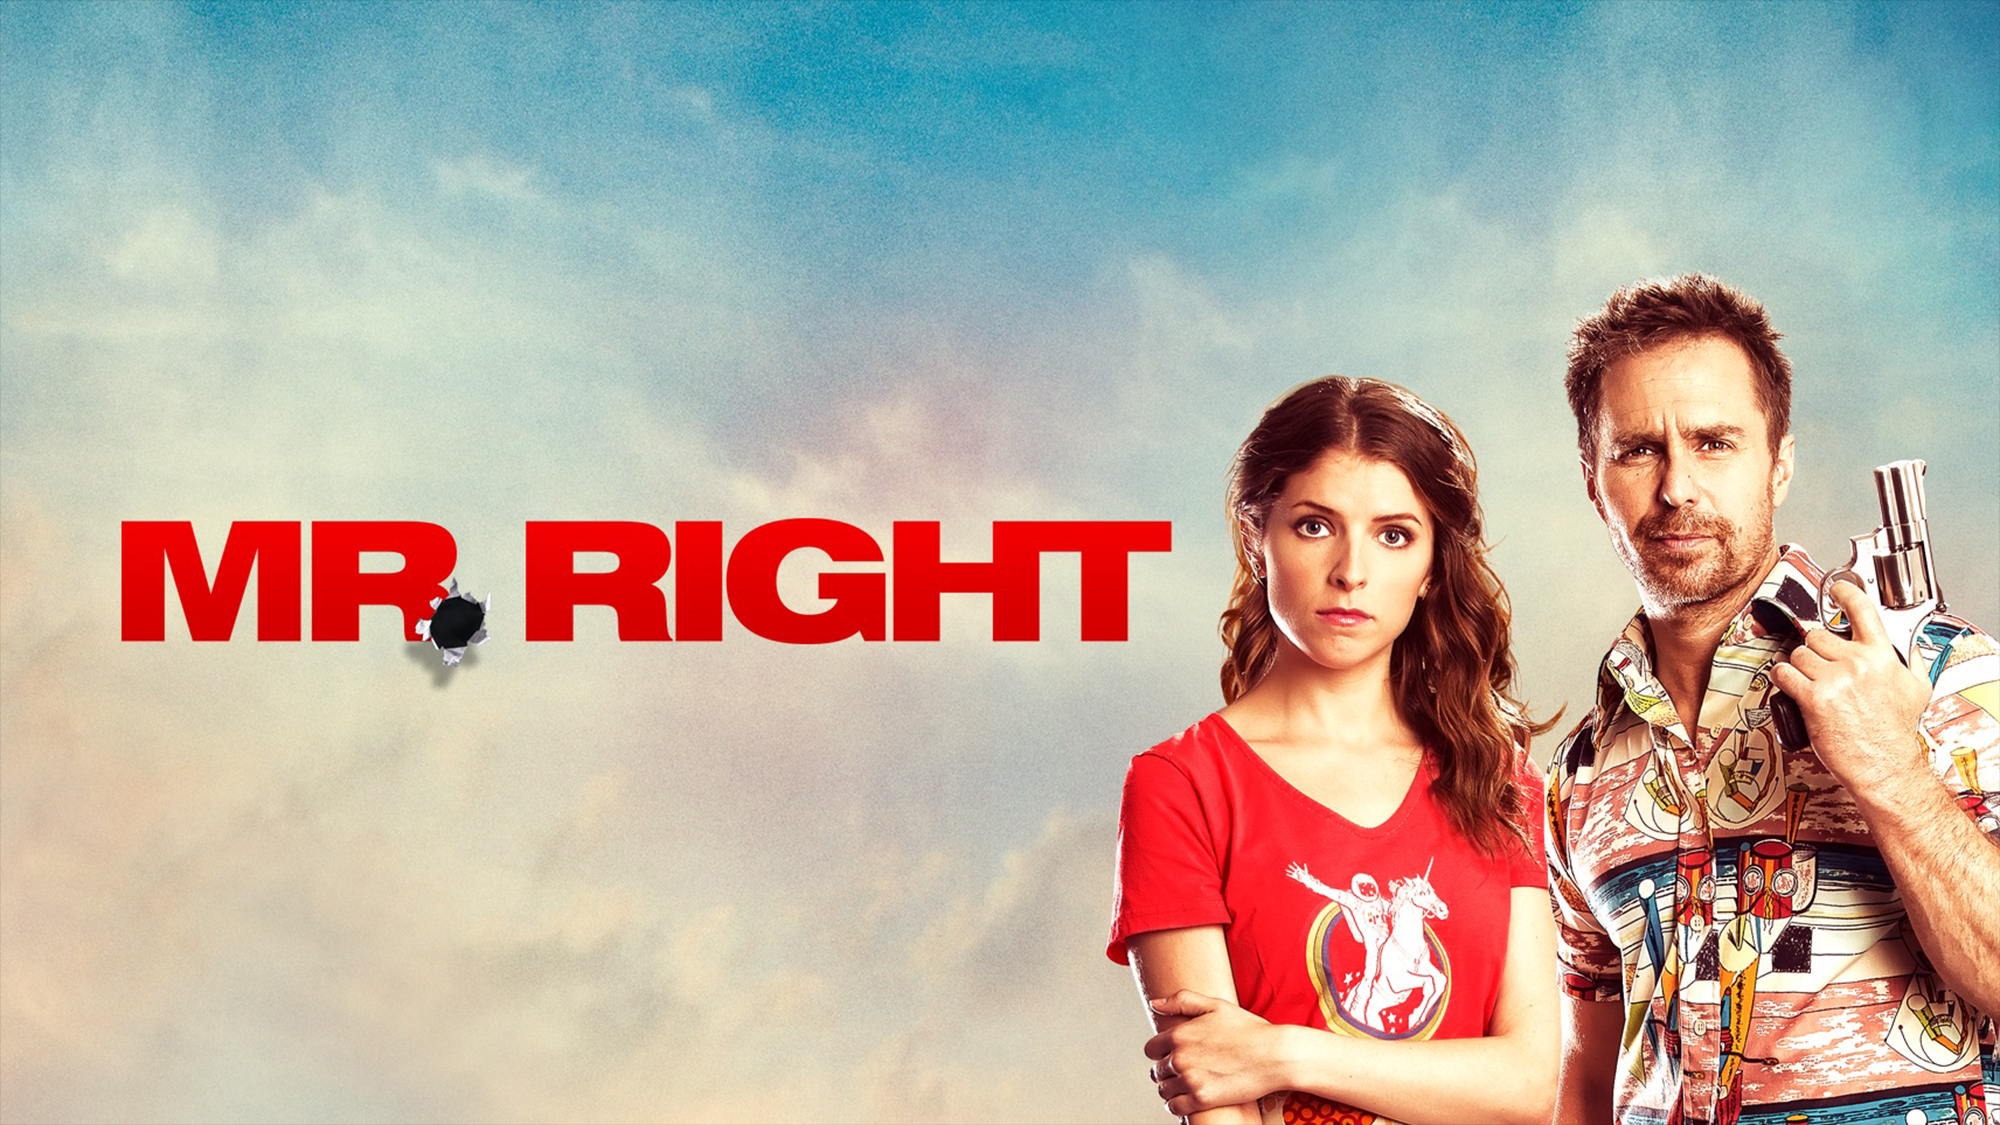 Movie Mr. Right HD Wallpaper | Background Image